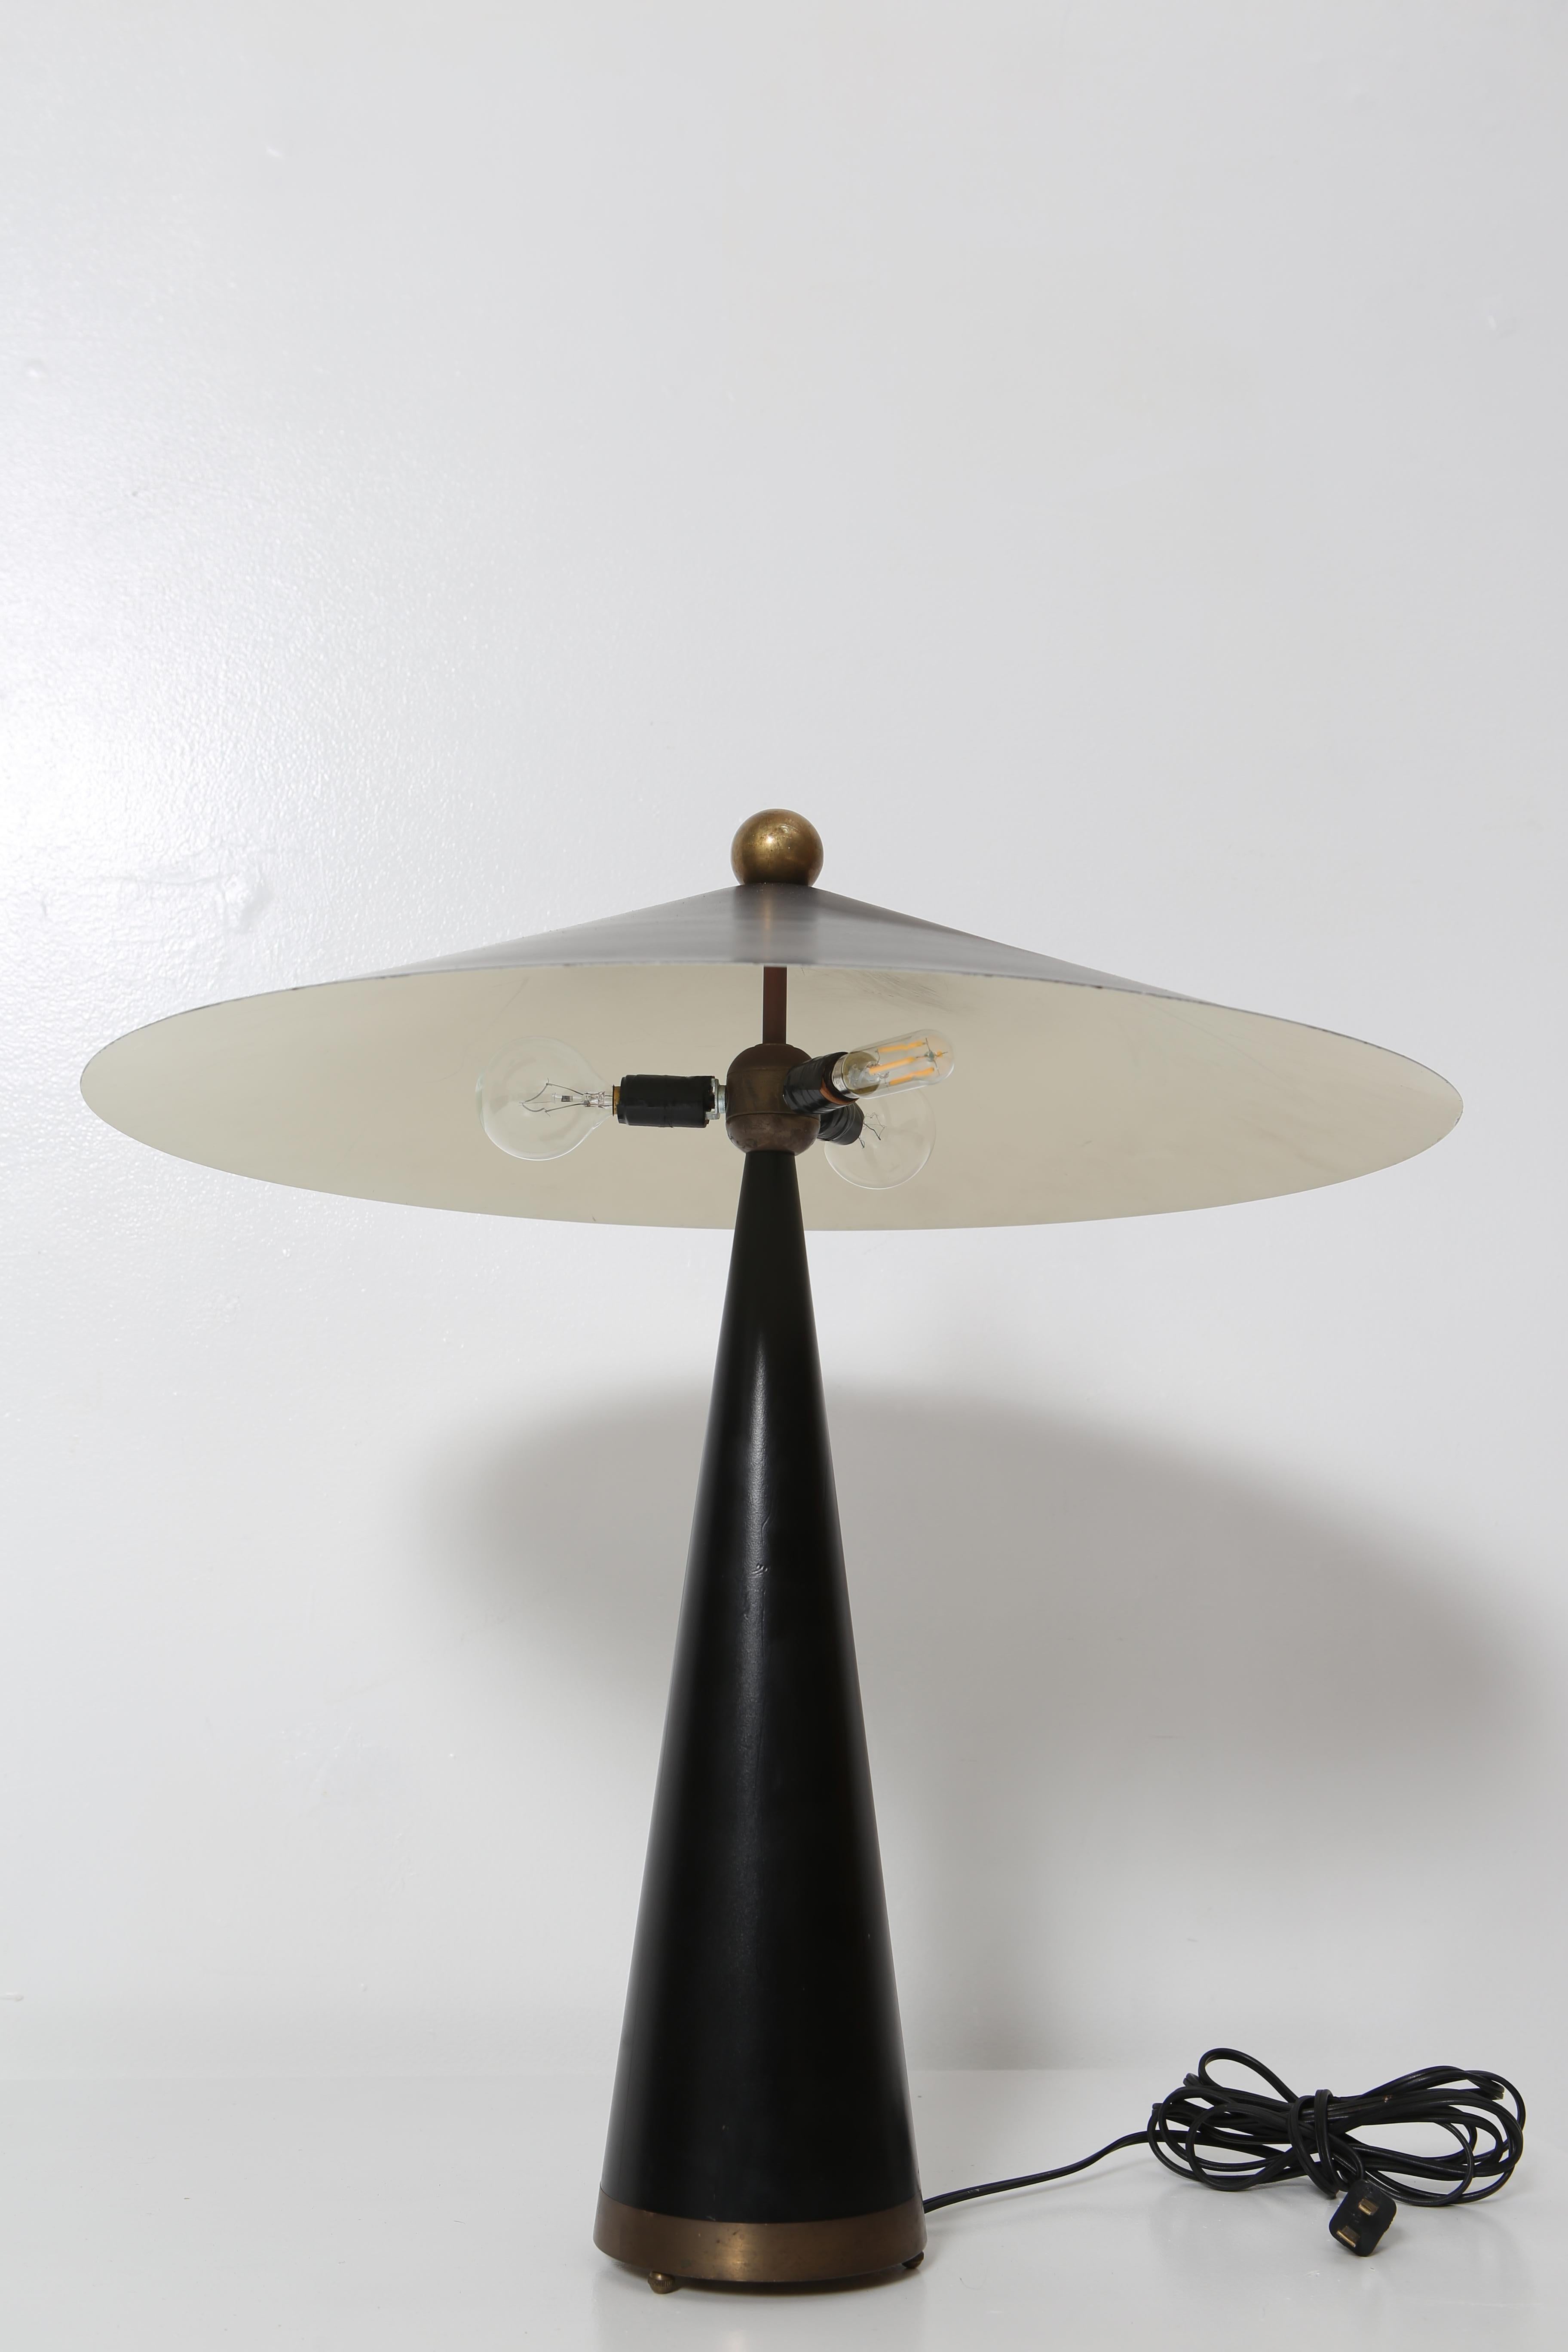 Striking table lamp in conical form; constructed of a substantial solid brass base, wrapped in leather, triple candelabra sockets under a spun steel lacquered shade. Oversized ball finial of solid brass. Handmade in Santa Cruz, CA 1988, “Johnson